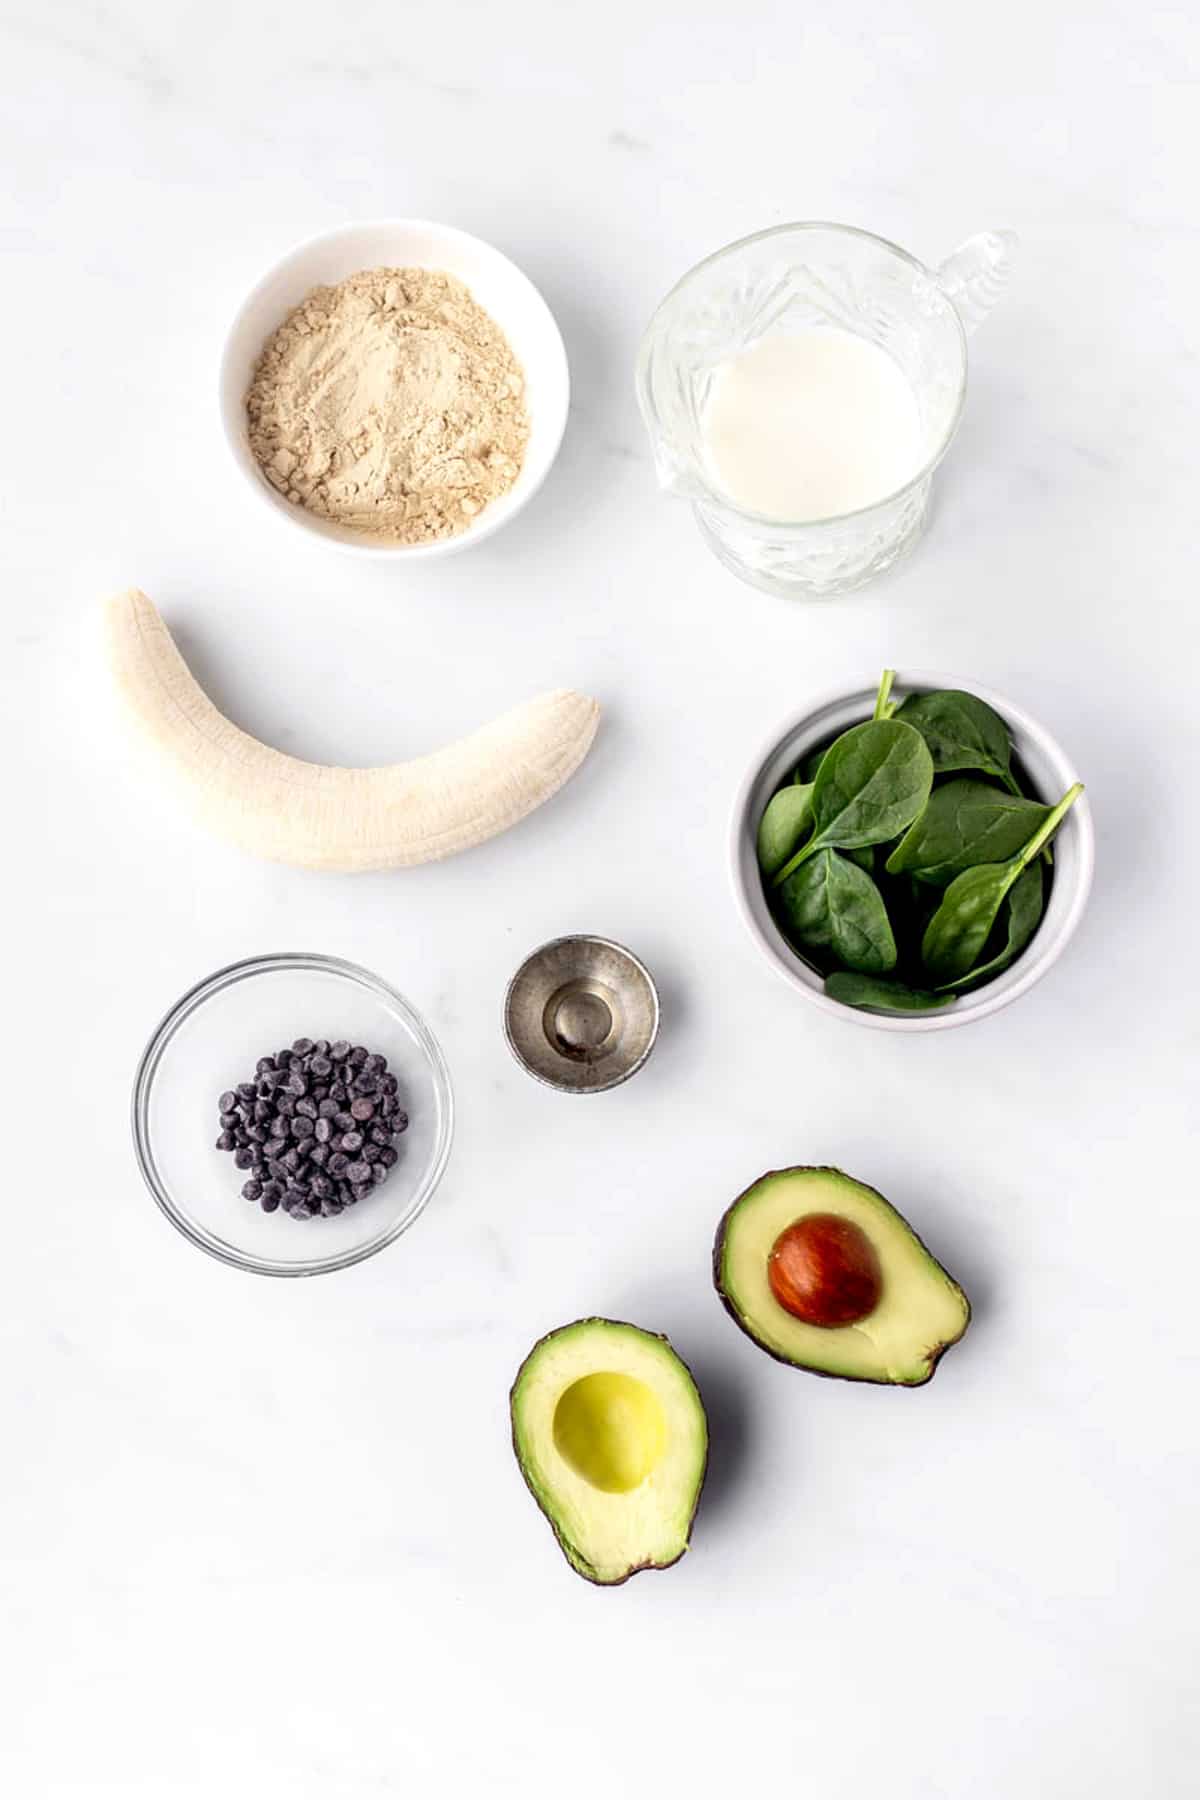 The ingredients required to make a homemade shamrock protein shake.